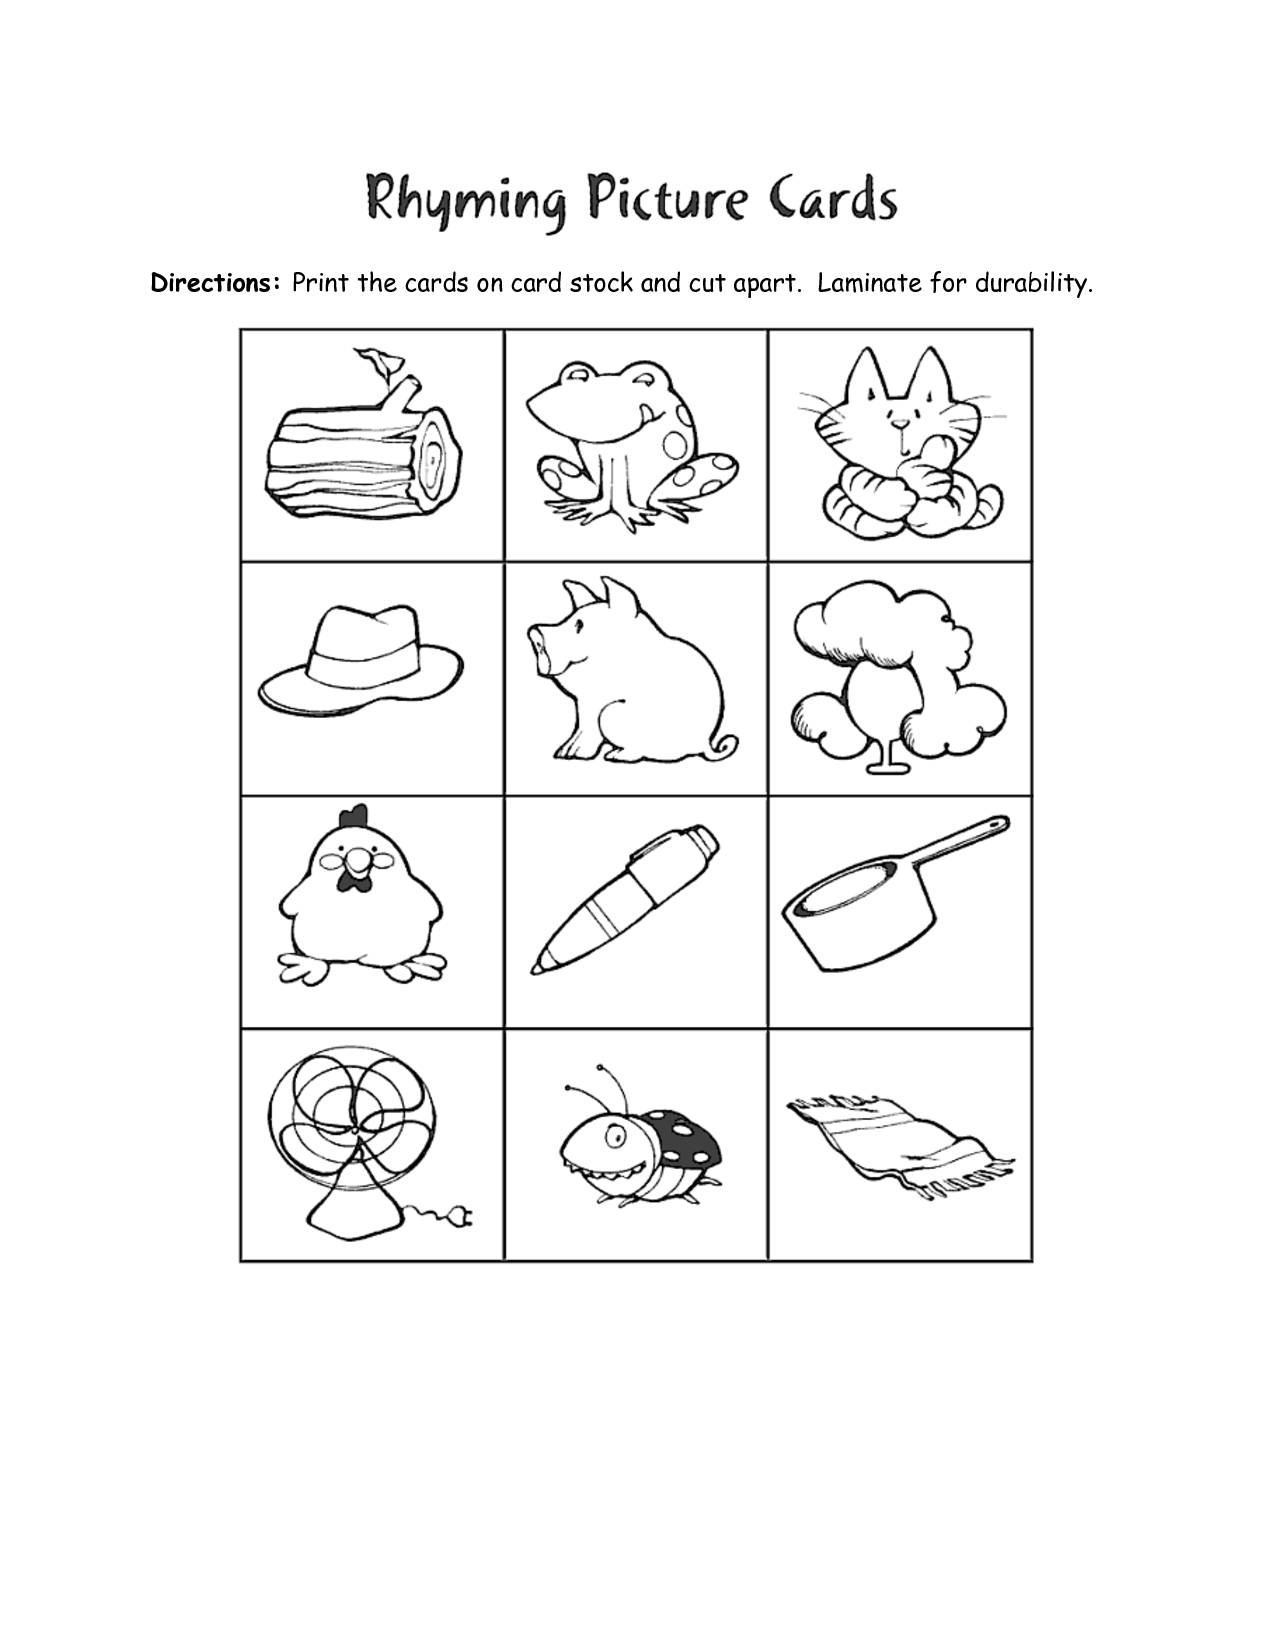 rhyming-picture-cards-printable-coloring-pages